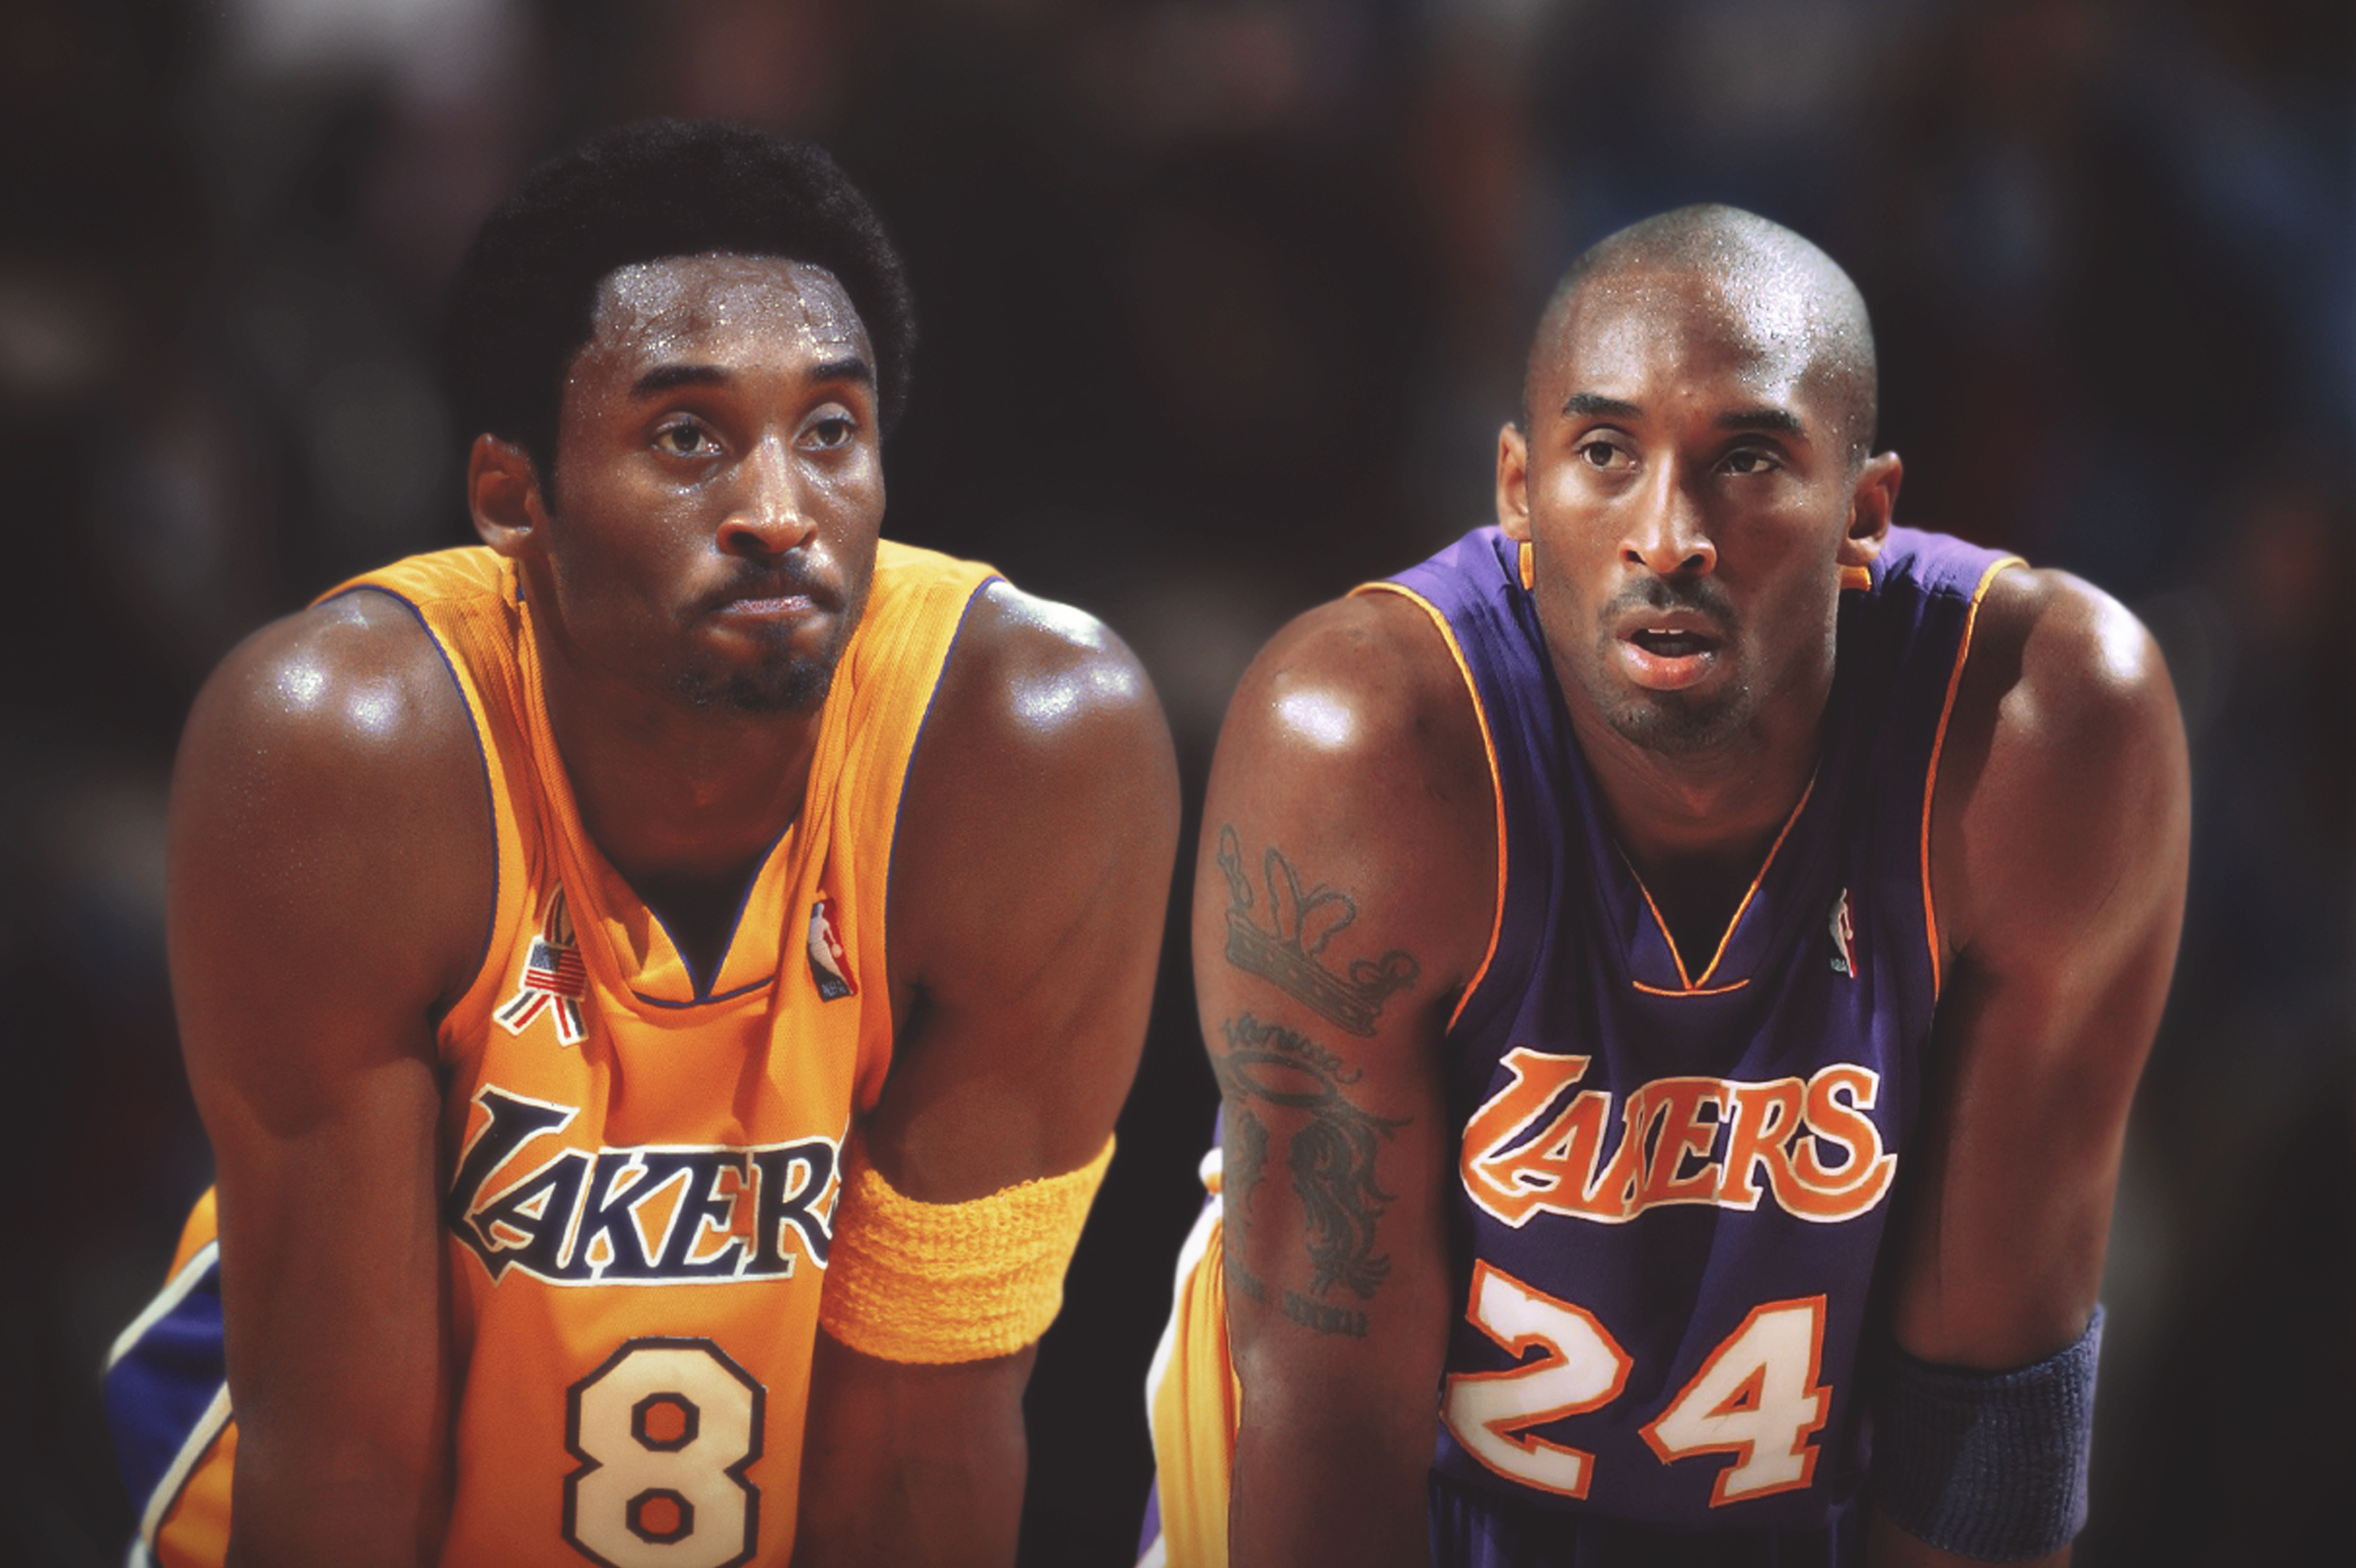 Which Lakers Jersey Should Kobe Bryant Wear in His Statue — 8 or | News, Highlights, Stats, and Rumors | Bleacher